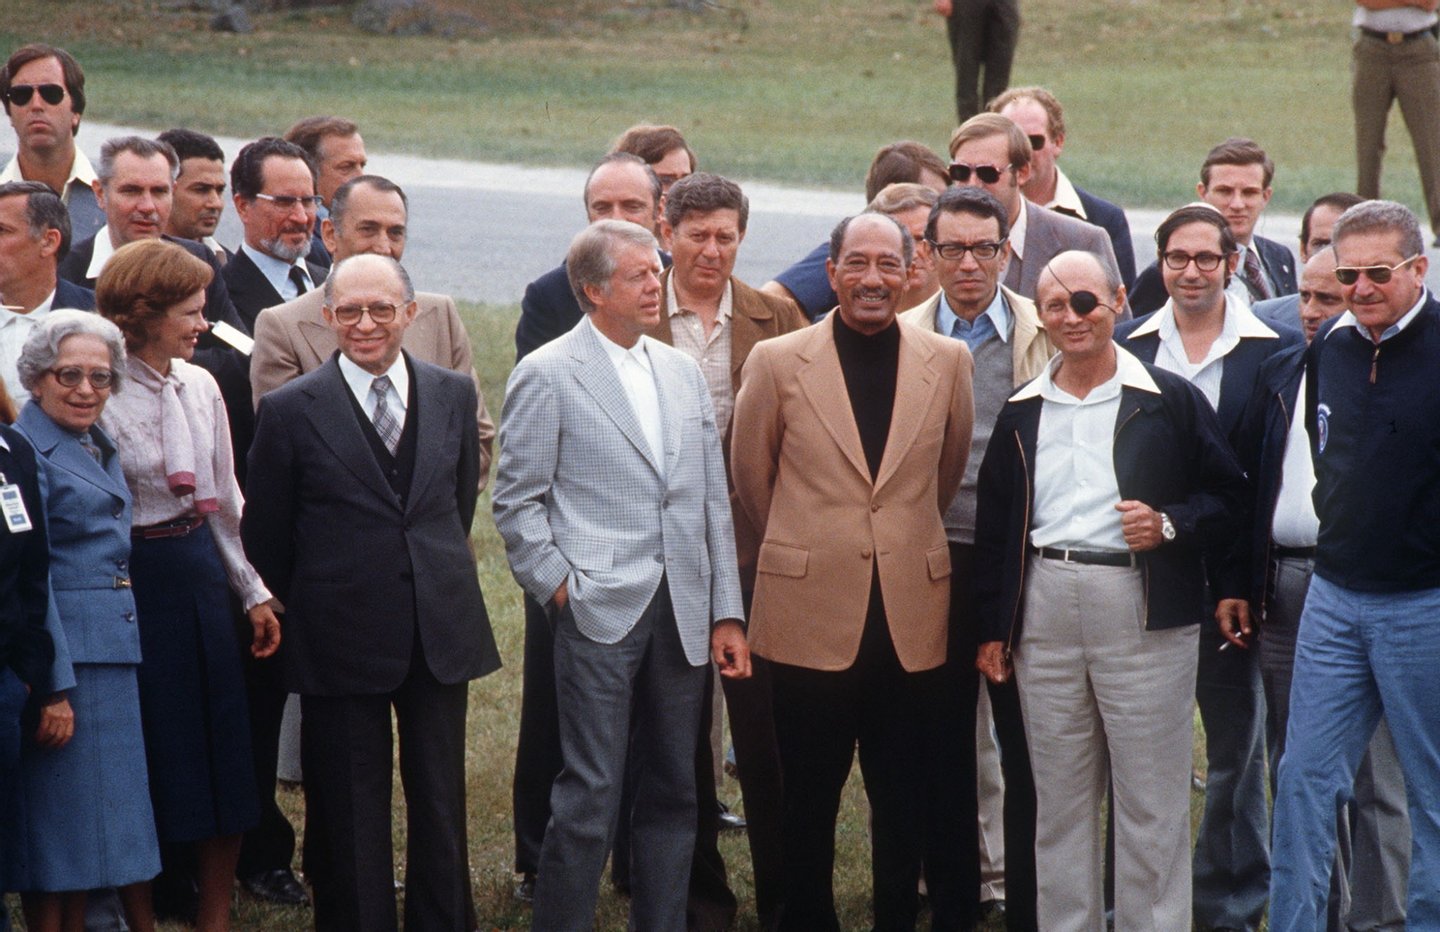 GETTYSBURG, UNITED STATES: Egyptian President Anwar al-Sadat (c) surrounded by (l-r) Aliza Begin, Rosalyn Carter, Israeli Premier Menachem Begin, US President Jimmy Carter, Israeli Foreign minister Moshe Dayan and Israeli Defence minister Ezer Weizman as they walk 10 September 1978 in Gettysburg during the Camp David Israeli-Egyptian peace negotiations. Boutros Boutros-Ghali, minister of state in Egypt's foreign ministry is standing between Sadat and Dayan and Elyahu Rubinstein, an Israeli advisor, is standing between Dayan and Weizman. Egypt began peace initiatives with Israel in late 1977, when Sadat visited Jerusalem. A year later, with the help of Carter, terms of peace between Egypt and Israel were negotiated at Camp David. A formal treaty, signed 26 March 1979 in Washington, D.C., granted full recognition of Israel by Egypt, opened trade relations between the two countries, and limited Egyptian military buildup in the Sinai. Israel agreed to return to final portion of occupied Sinai to Egypt. (Photo credit should read AFP/AFP/Getty Images)